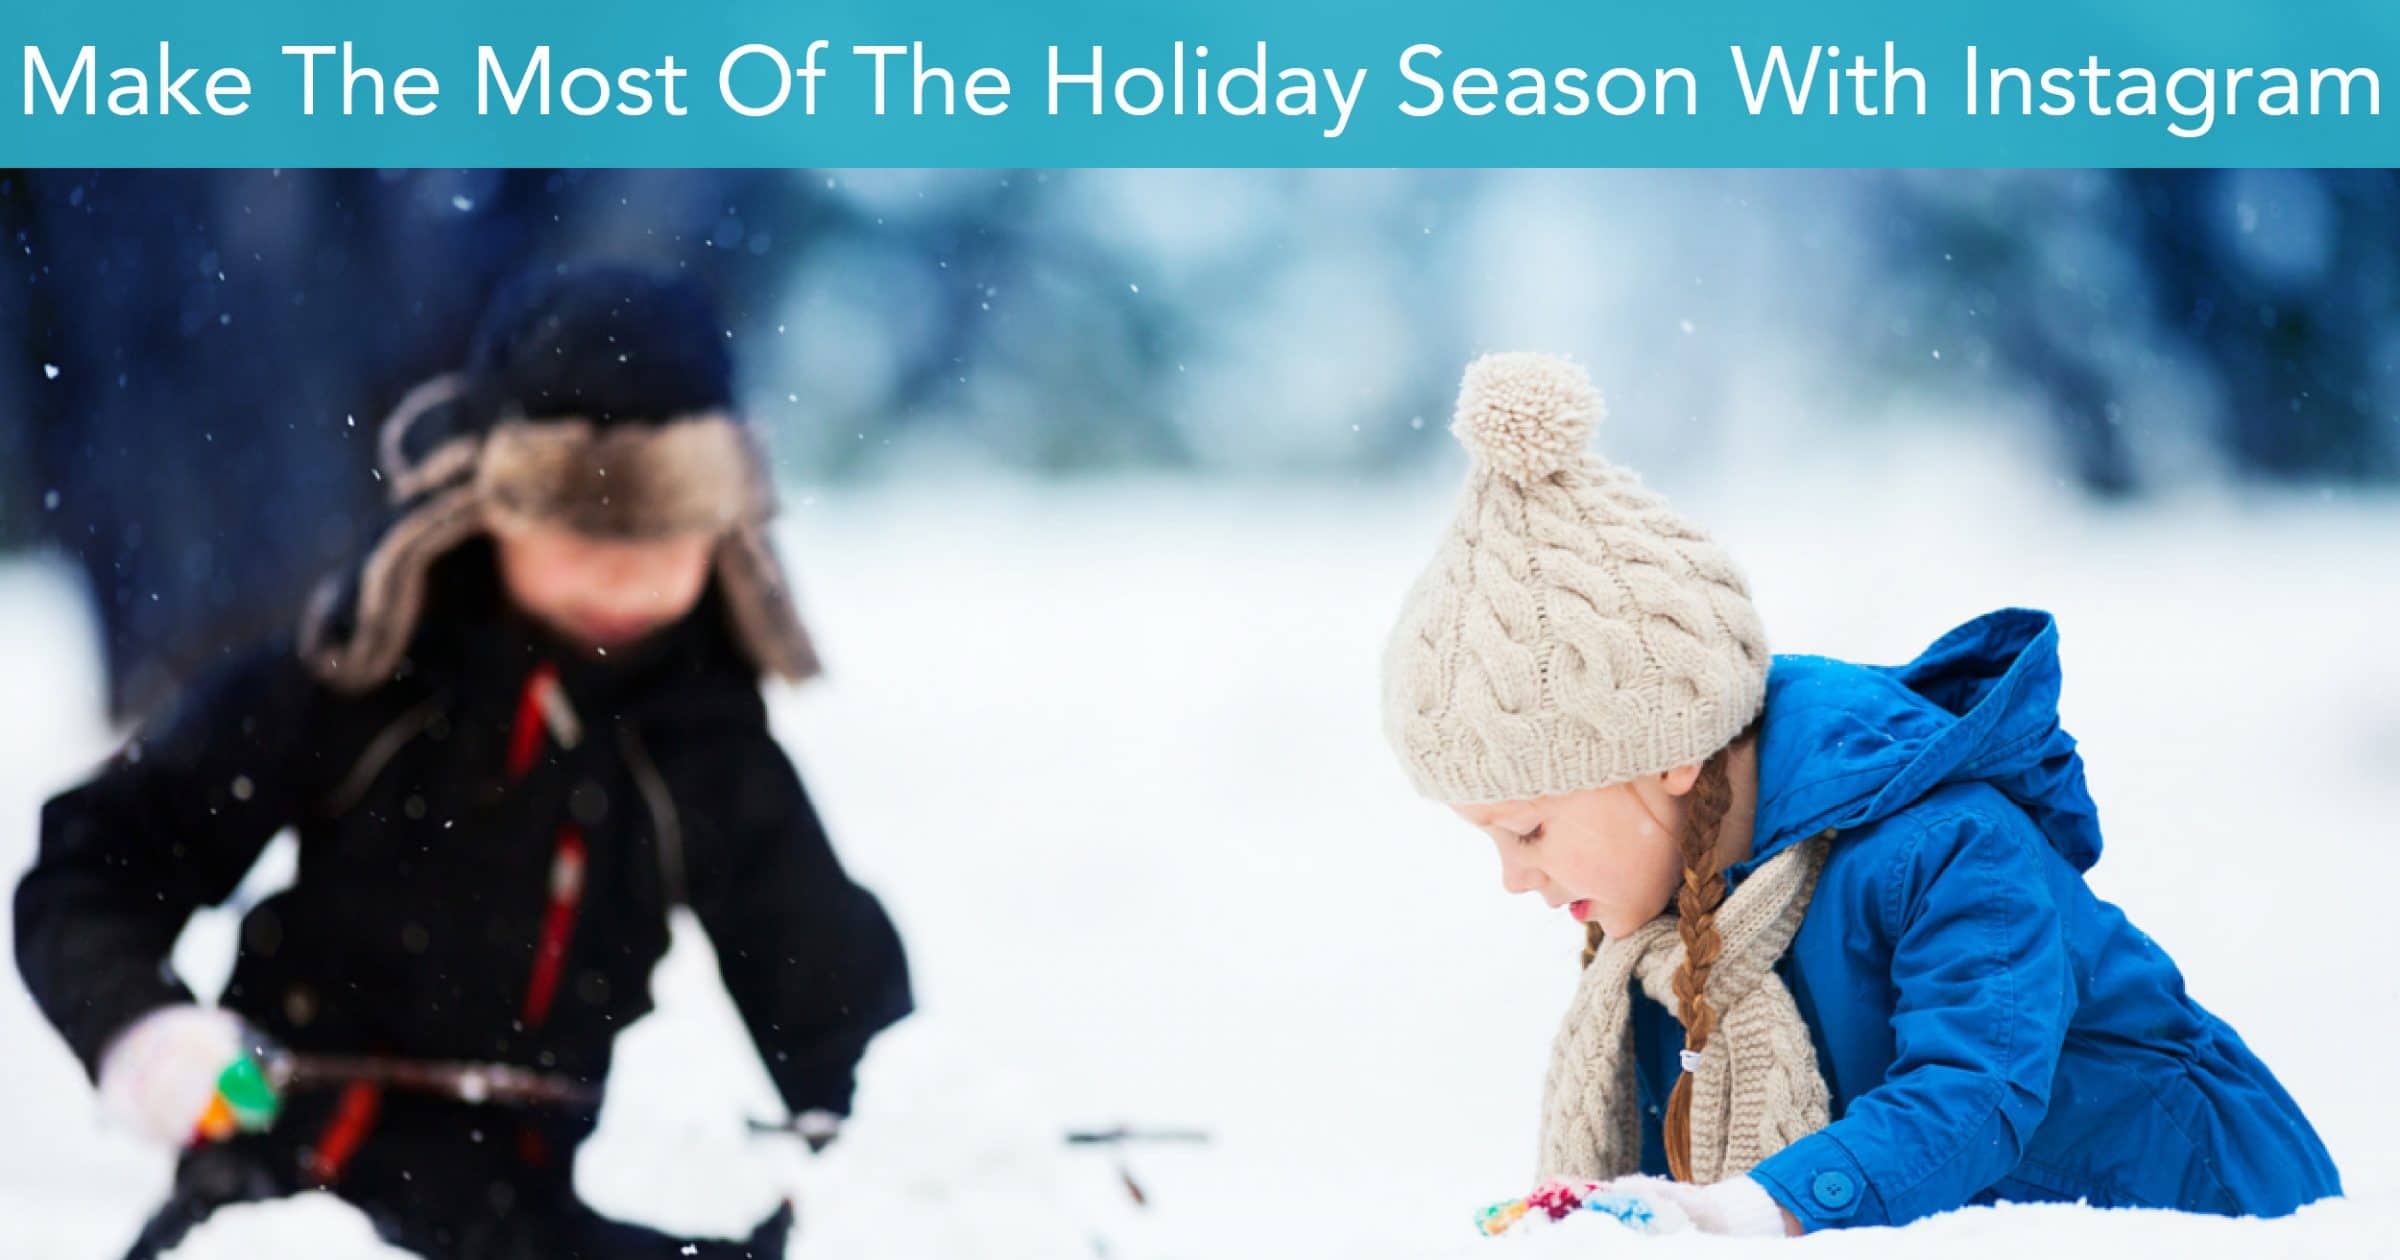 Blog header that shows two children in the snow and text that says 4 Ways to Boost Holidays Sales on Instagram.